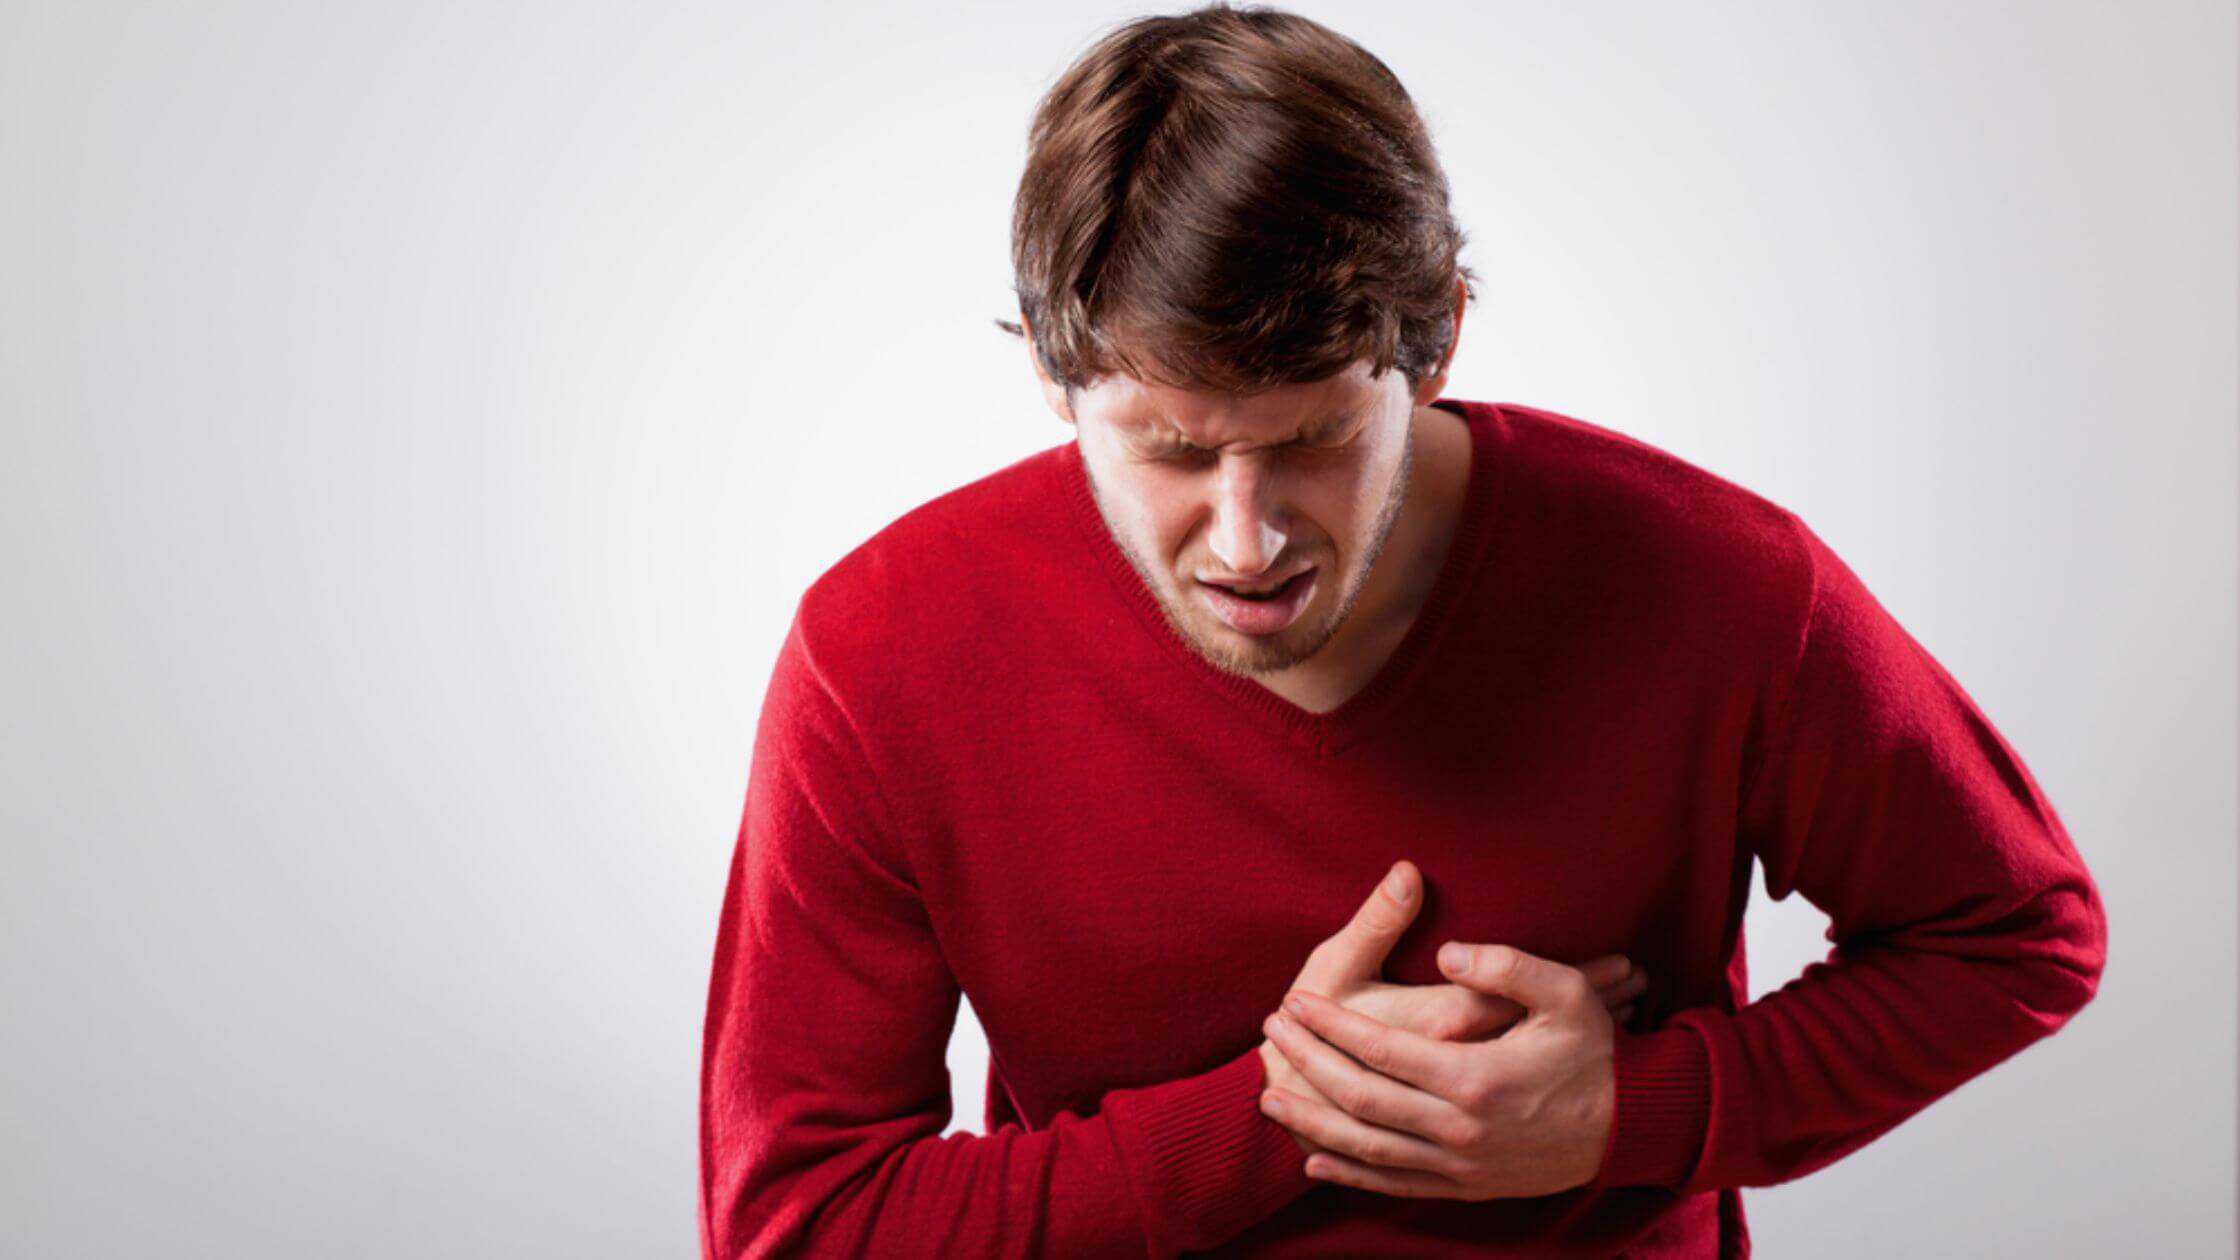 Is Better Screening Able To Prevent Sudden Cardiac Death In Young People?